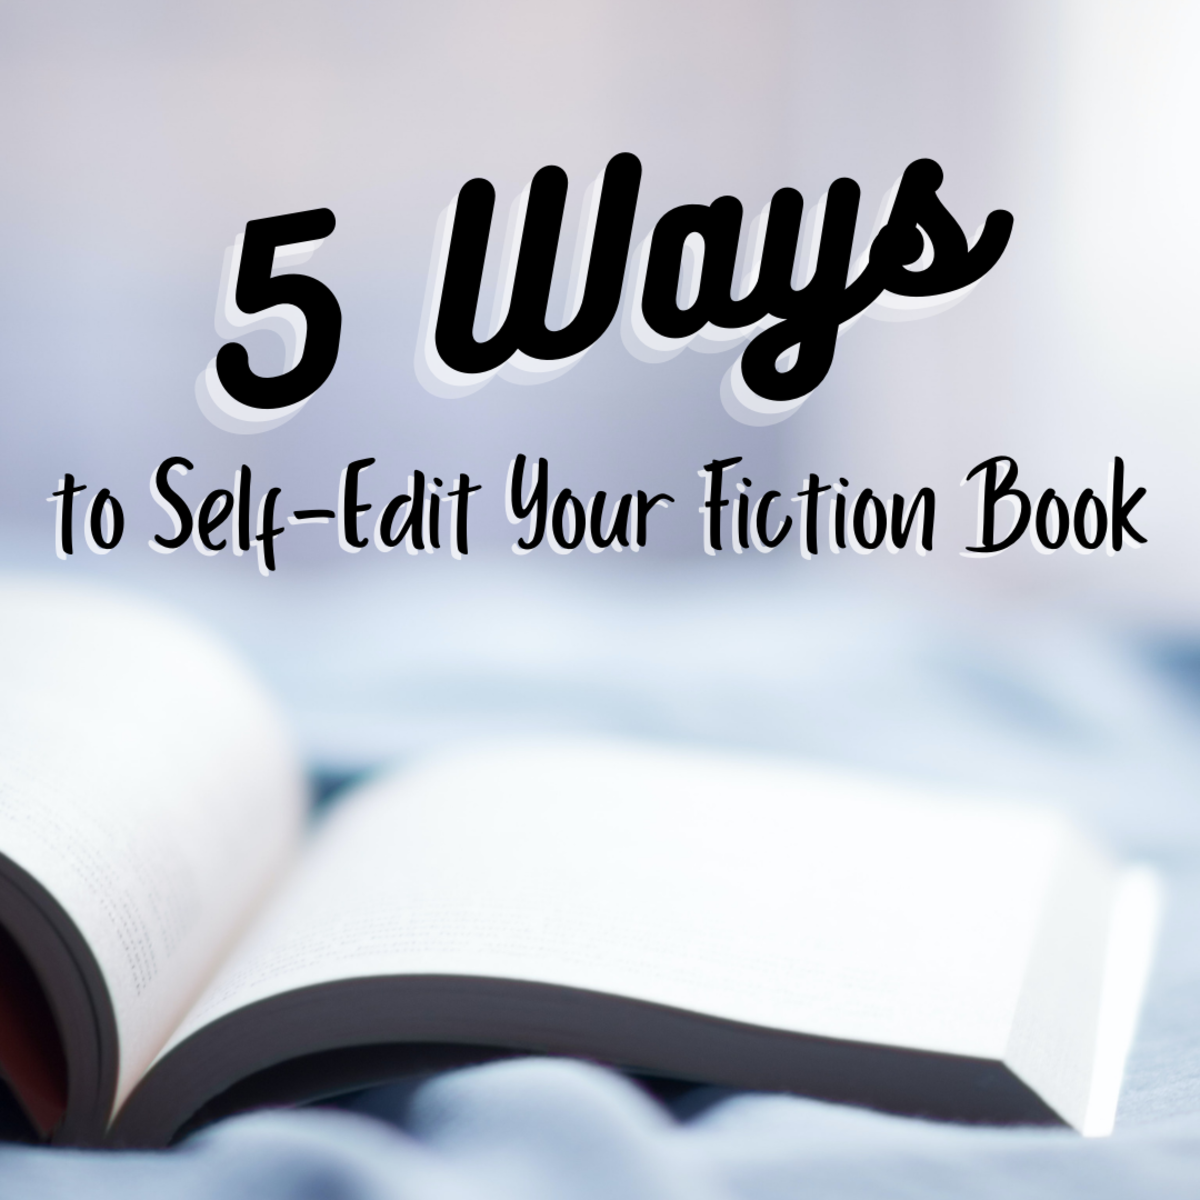 Read on to discover 5 ways you can self-edit your book before another editor or potential publisher sees it.